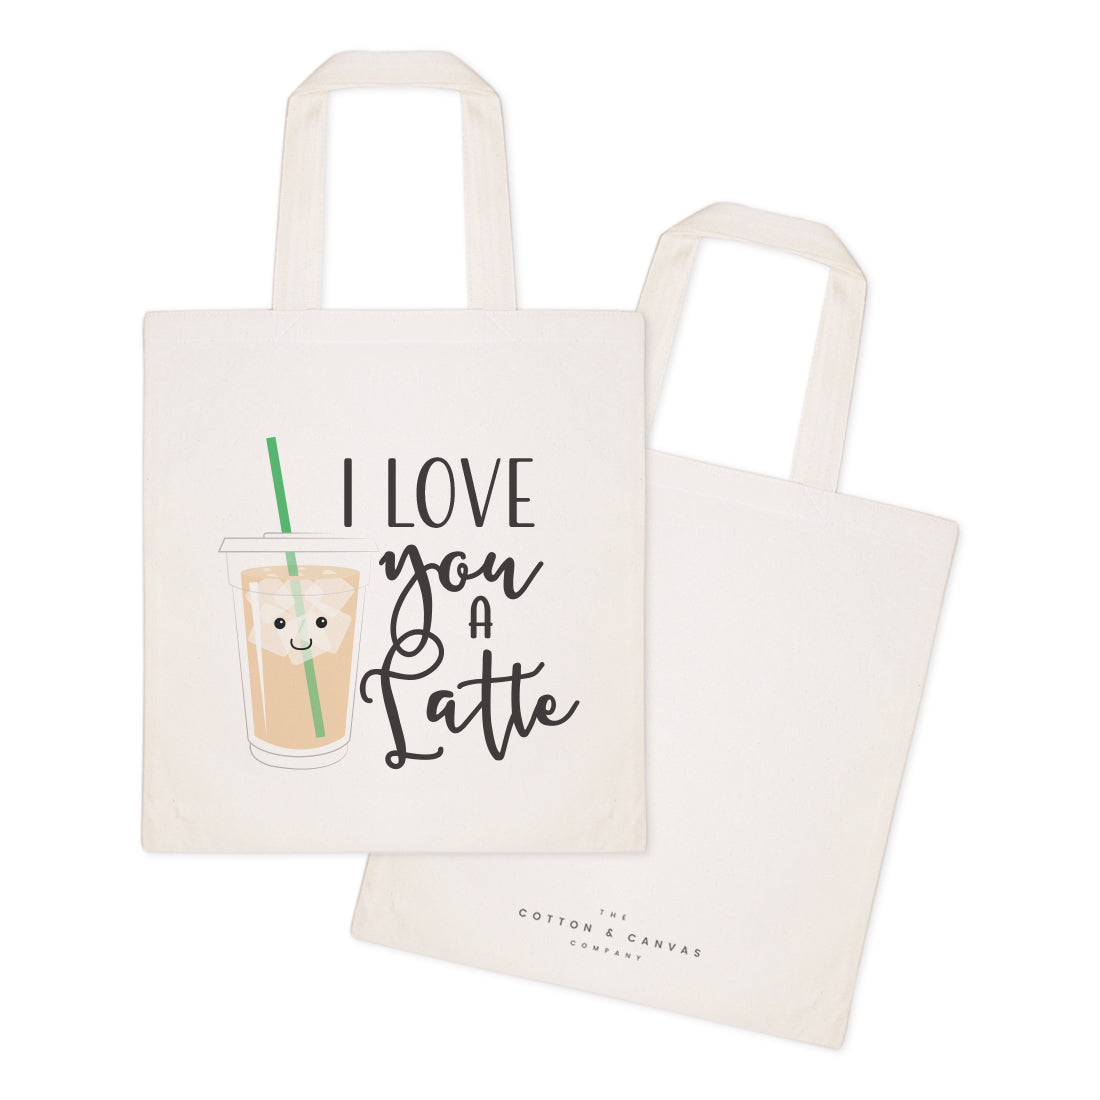 I Love You a Latte Cotton Canvas Tote Bag by The Cotton & Canvas Co.